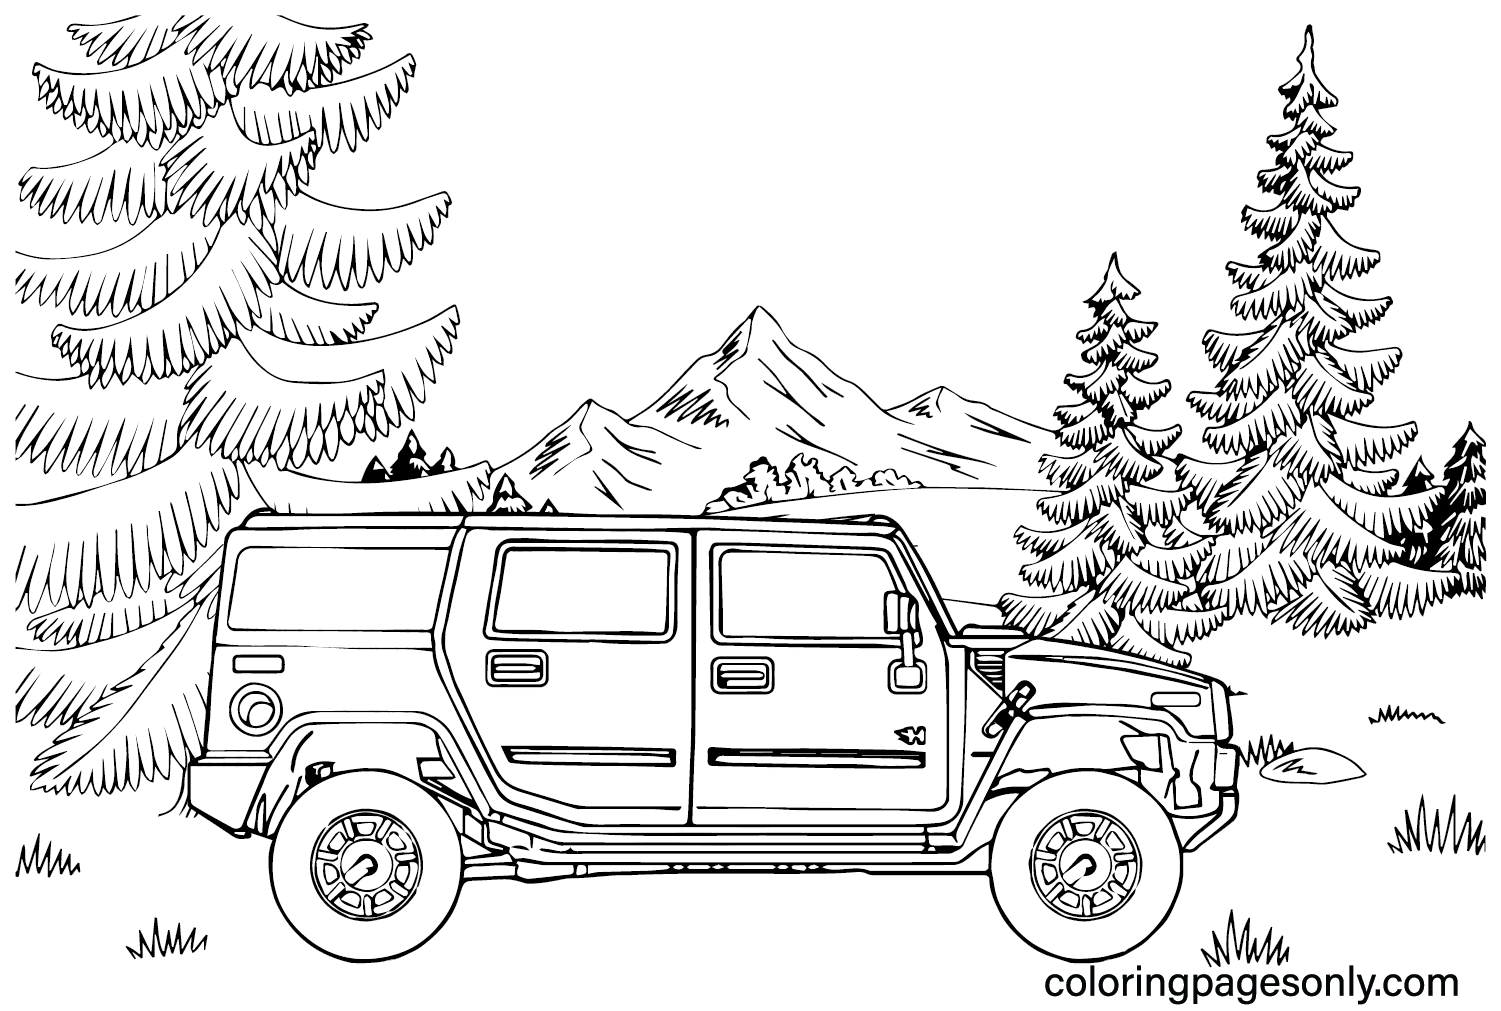 Hummer H2 SUV Coloring Page - Free Printable Coloring Pages